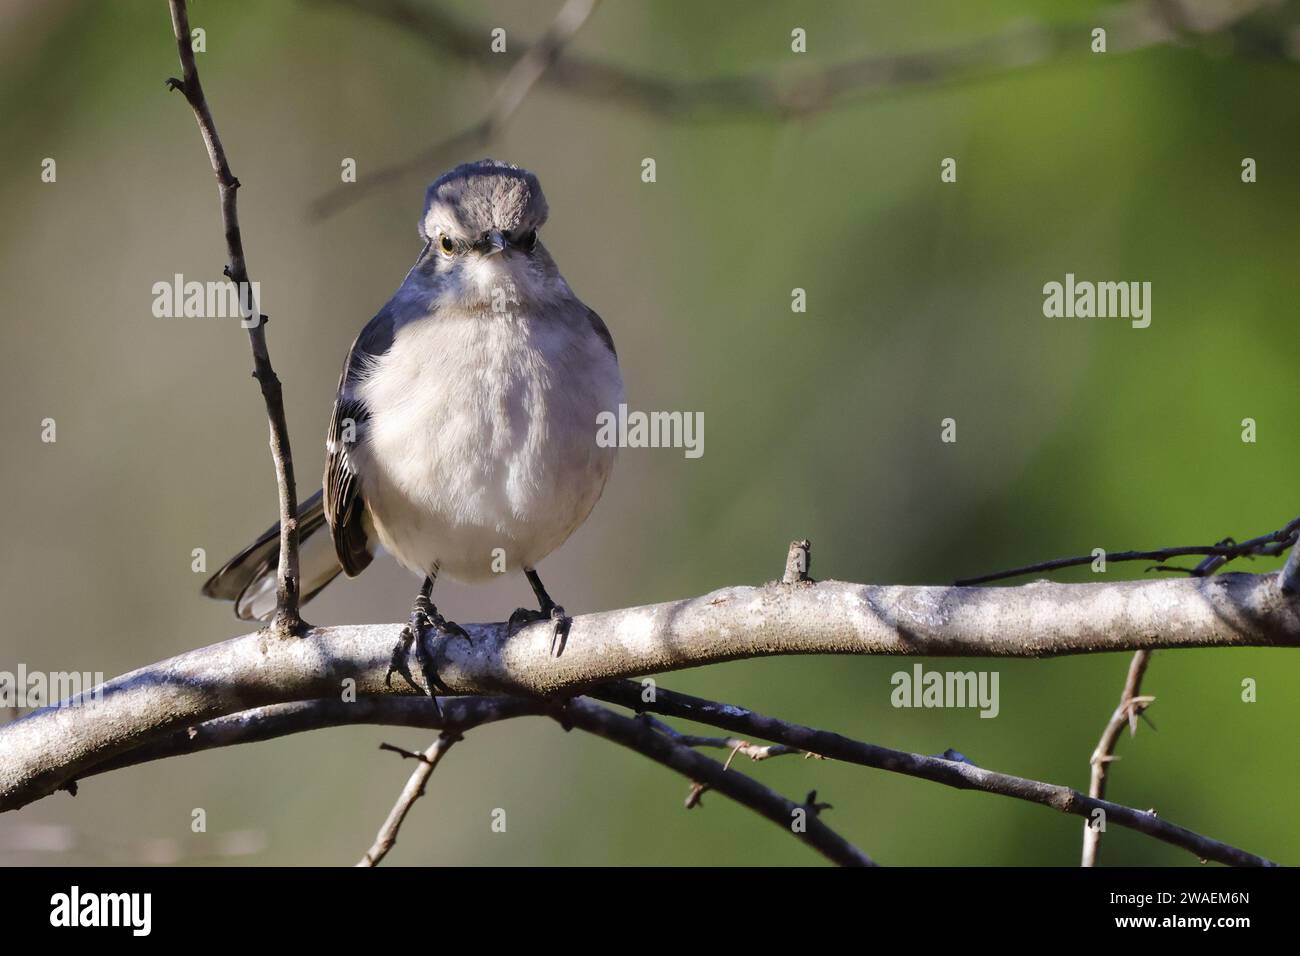 A small dove perched on a barren tree branch, its gray and white feathers contrasting the brown and beige bark Stock Photo